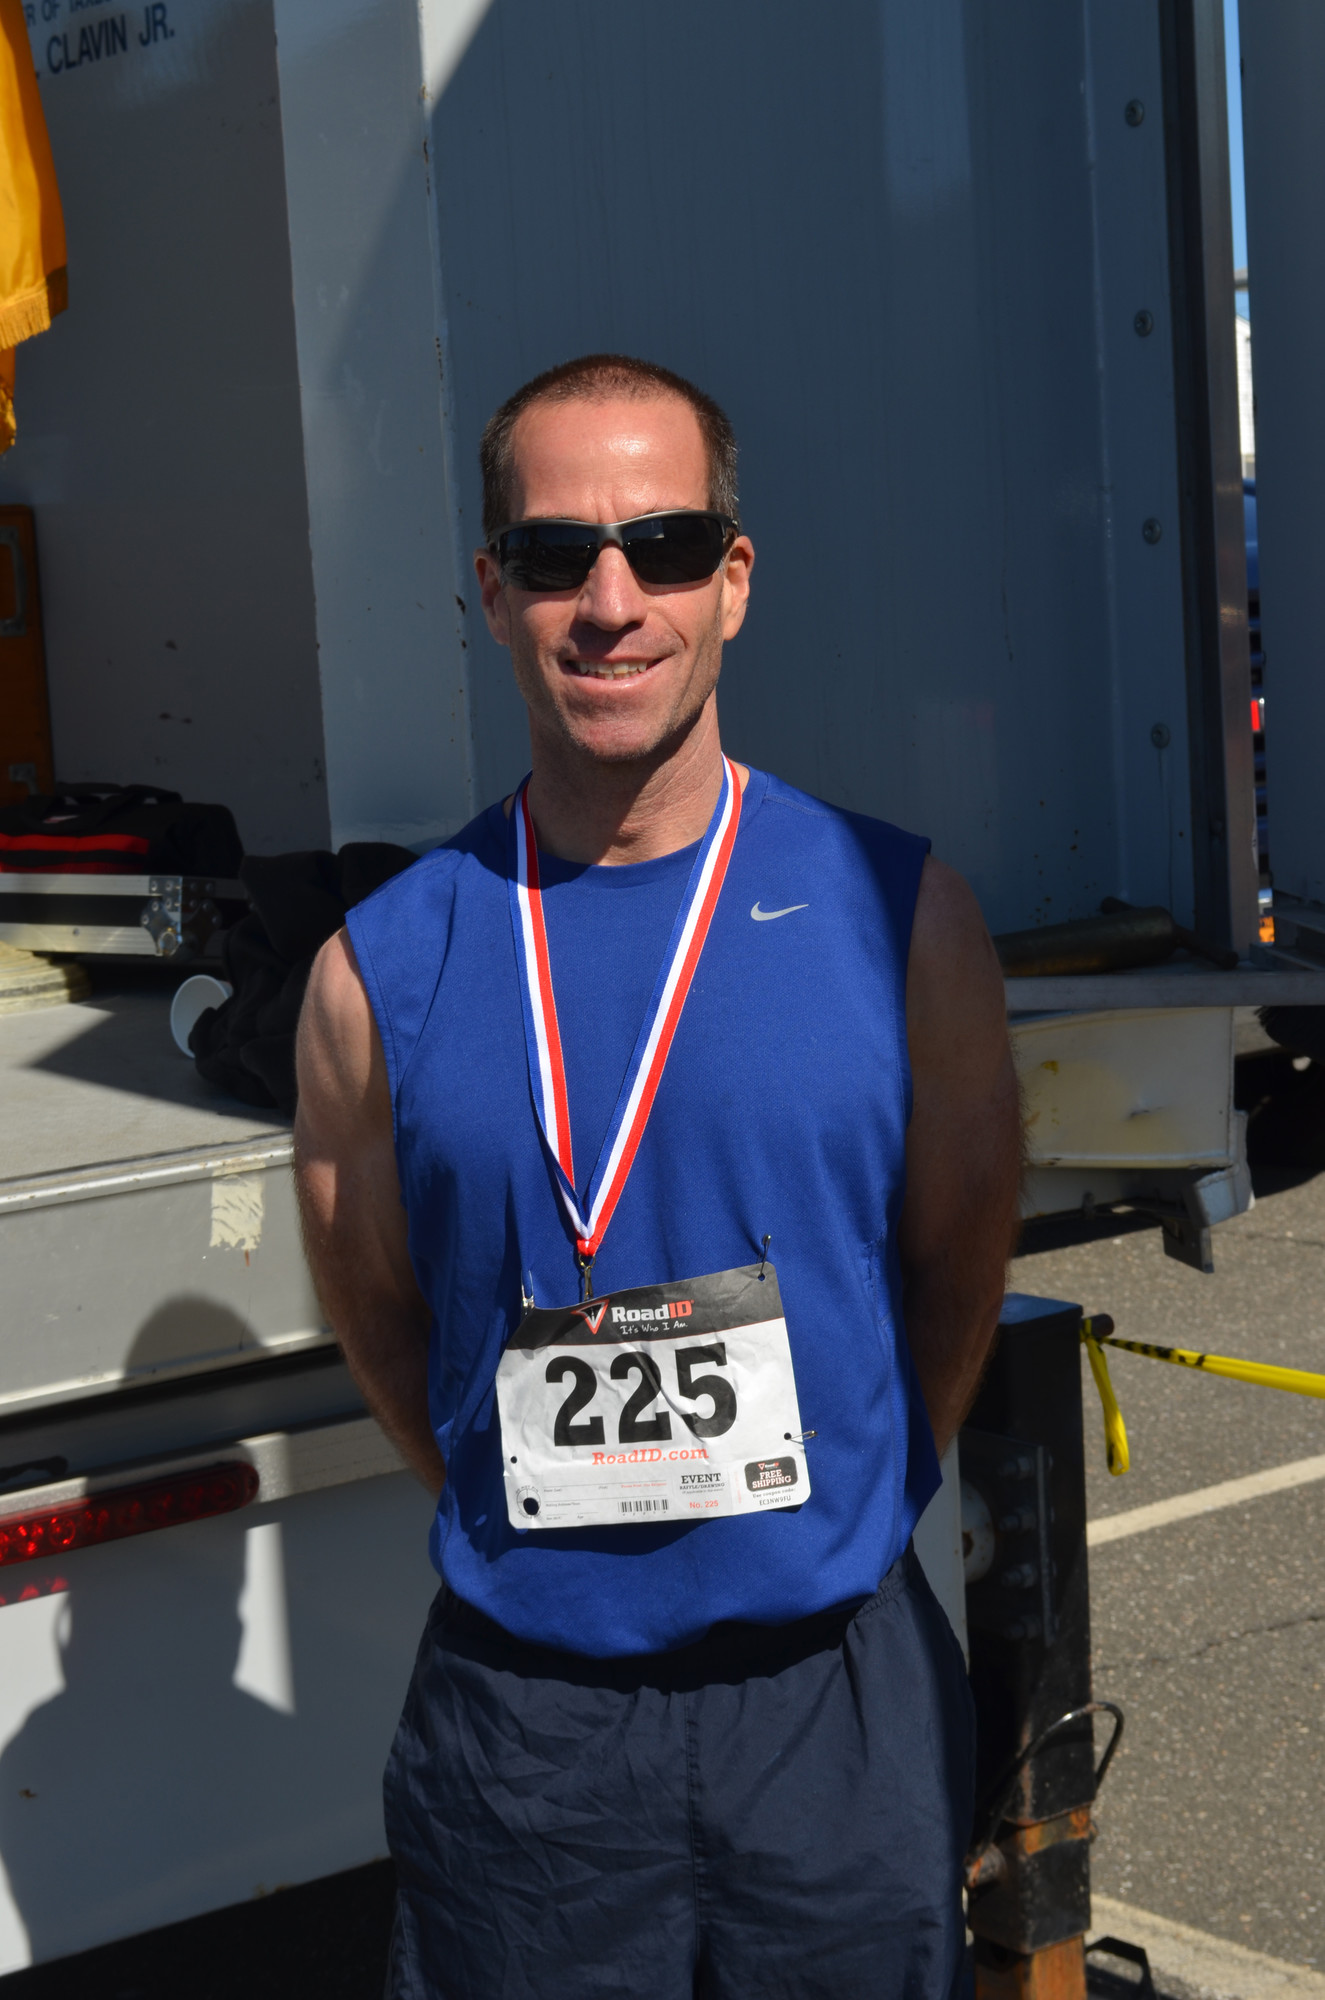 1st in the 50-54 age group John Nicolini from Massapequa Park